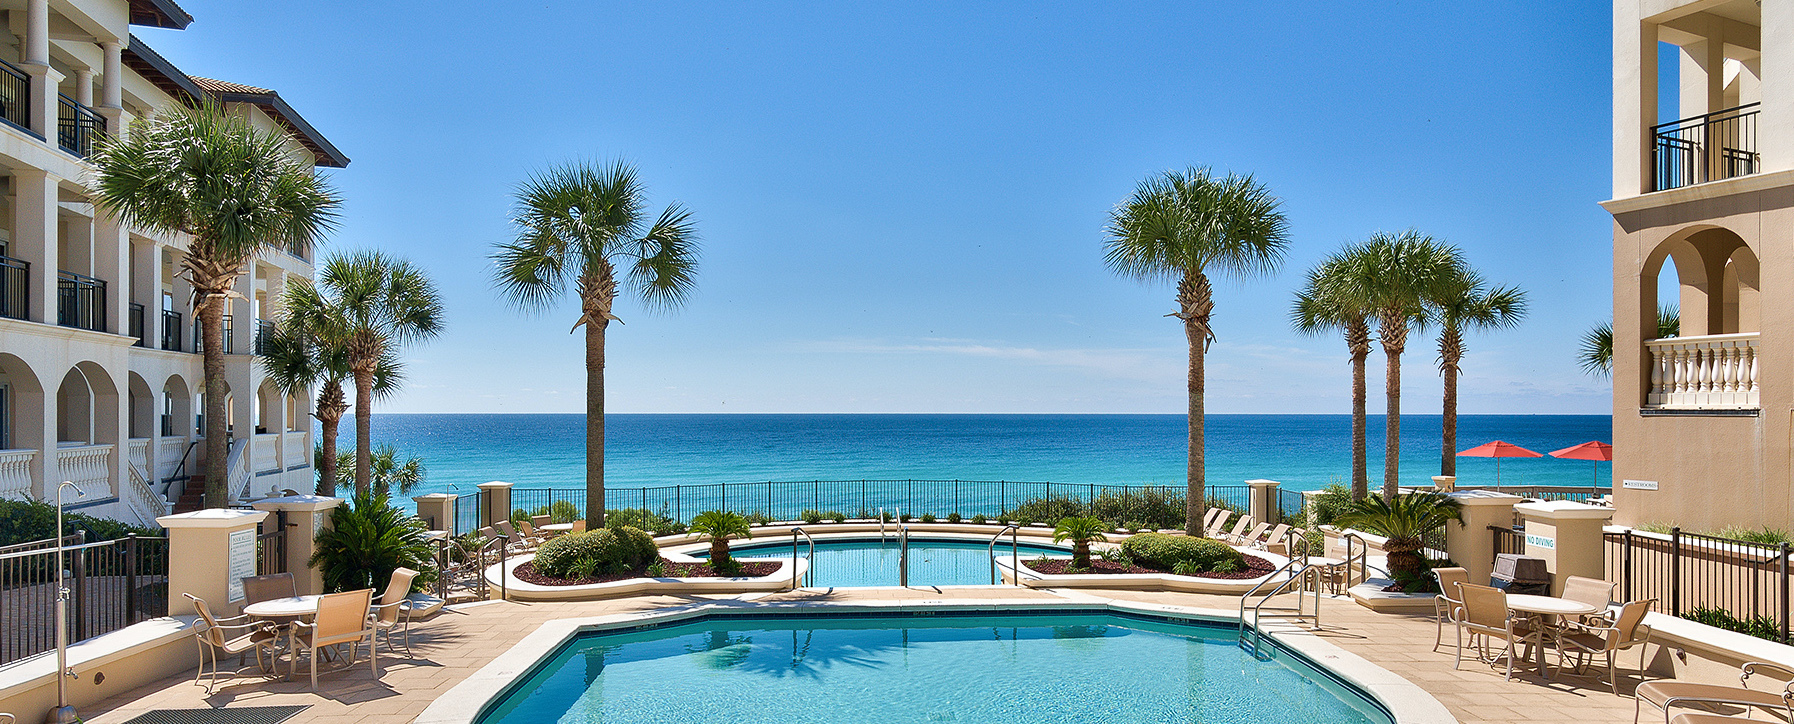 A tropic-esque view of the gulf from the outdoor pool at Bella Vita condominium on 30A